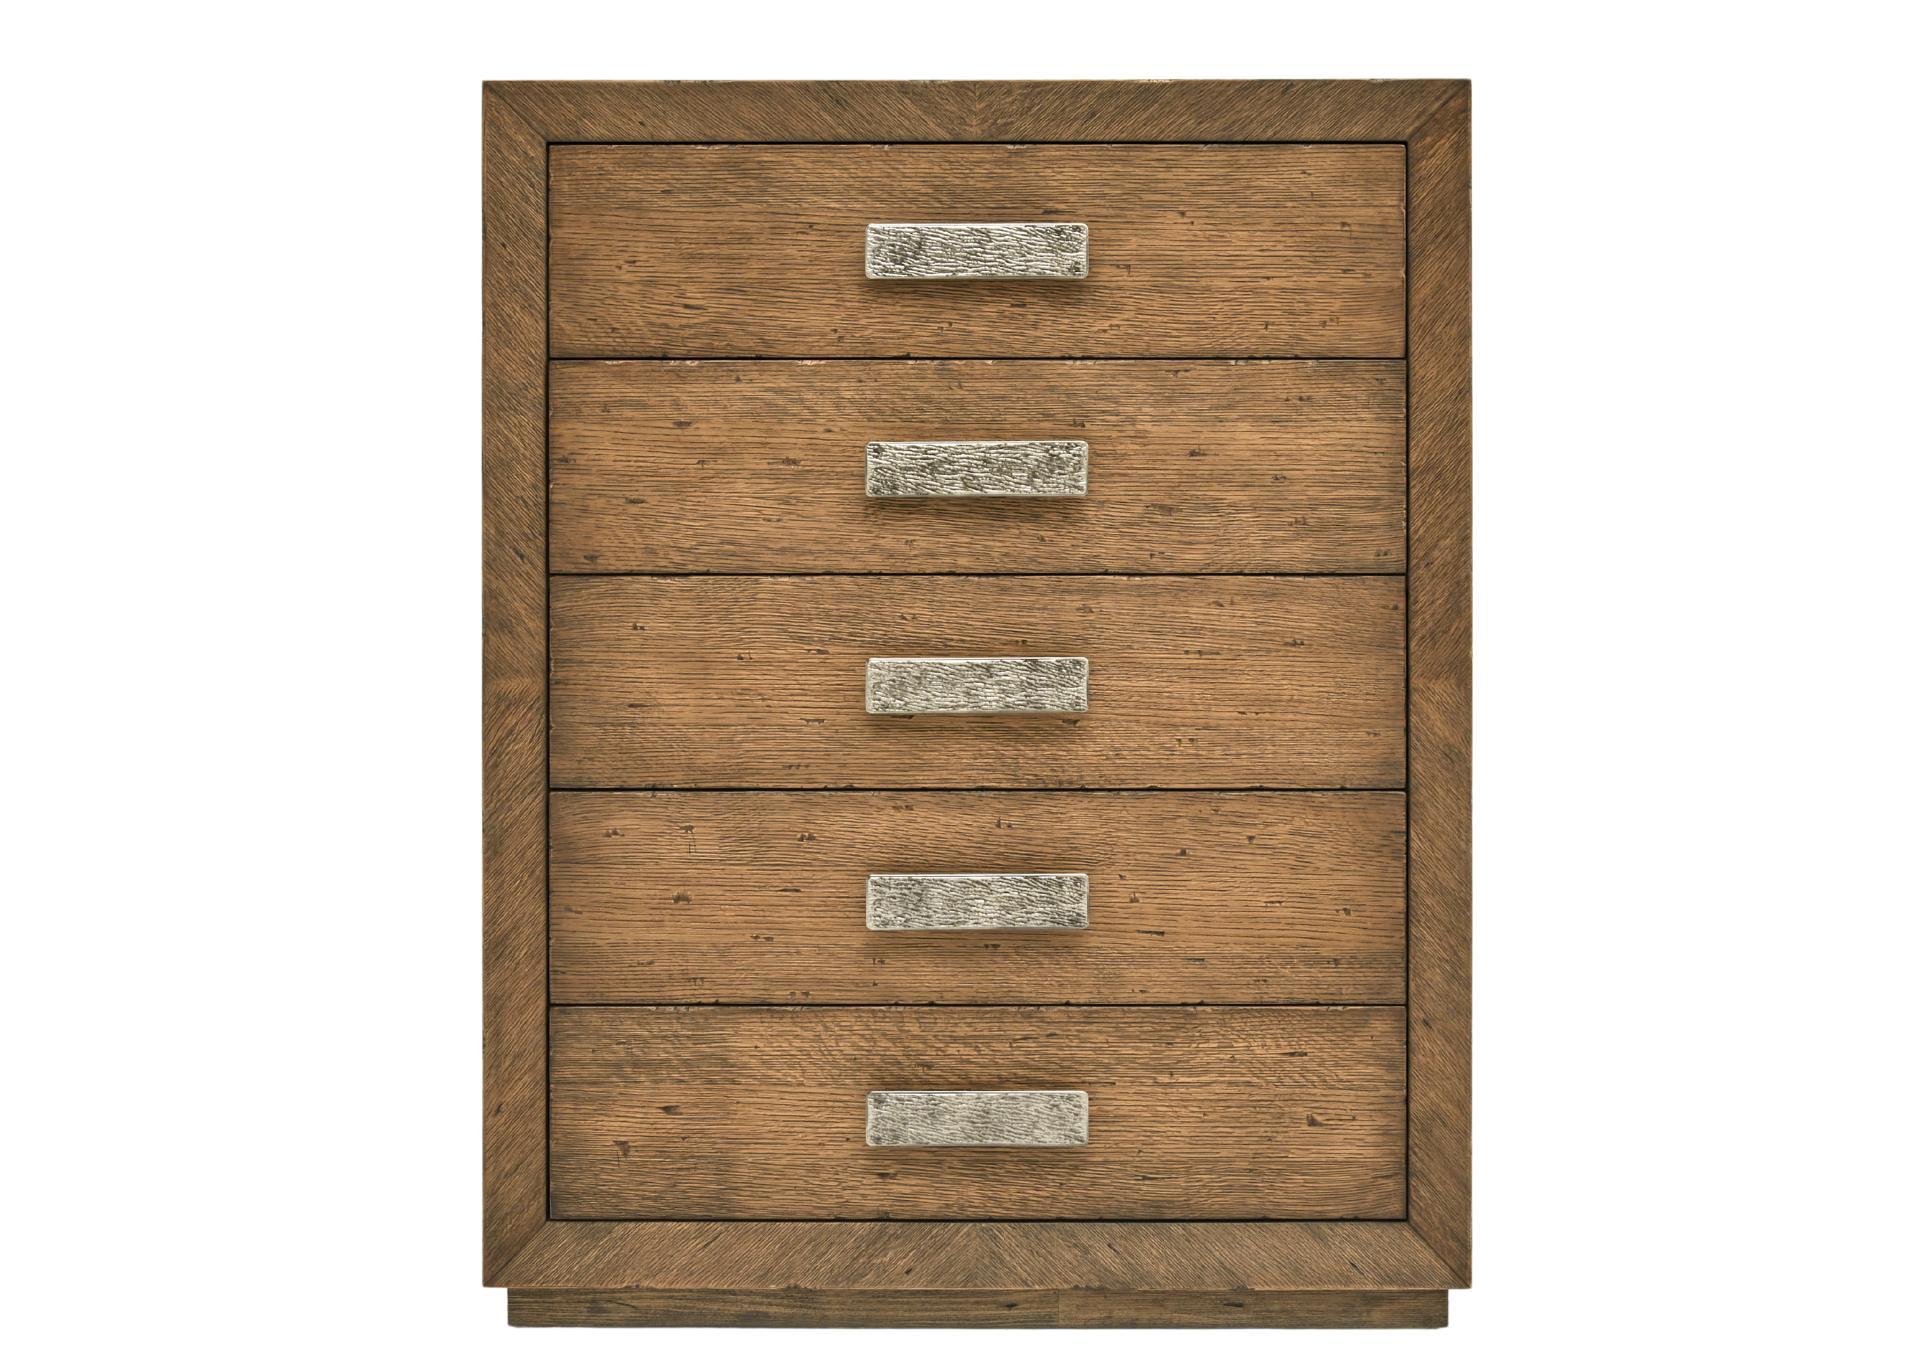 AMHERST LIGHT OAK DRAWER CHEST,MAGS